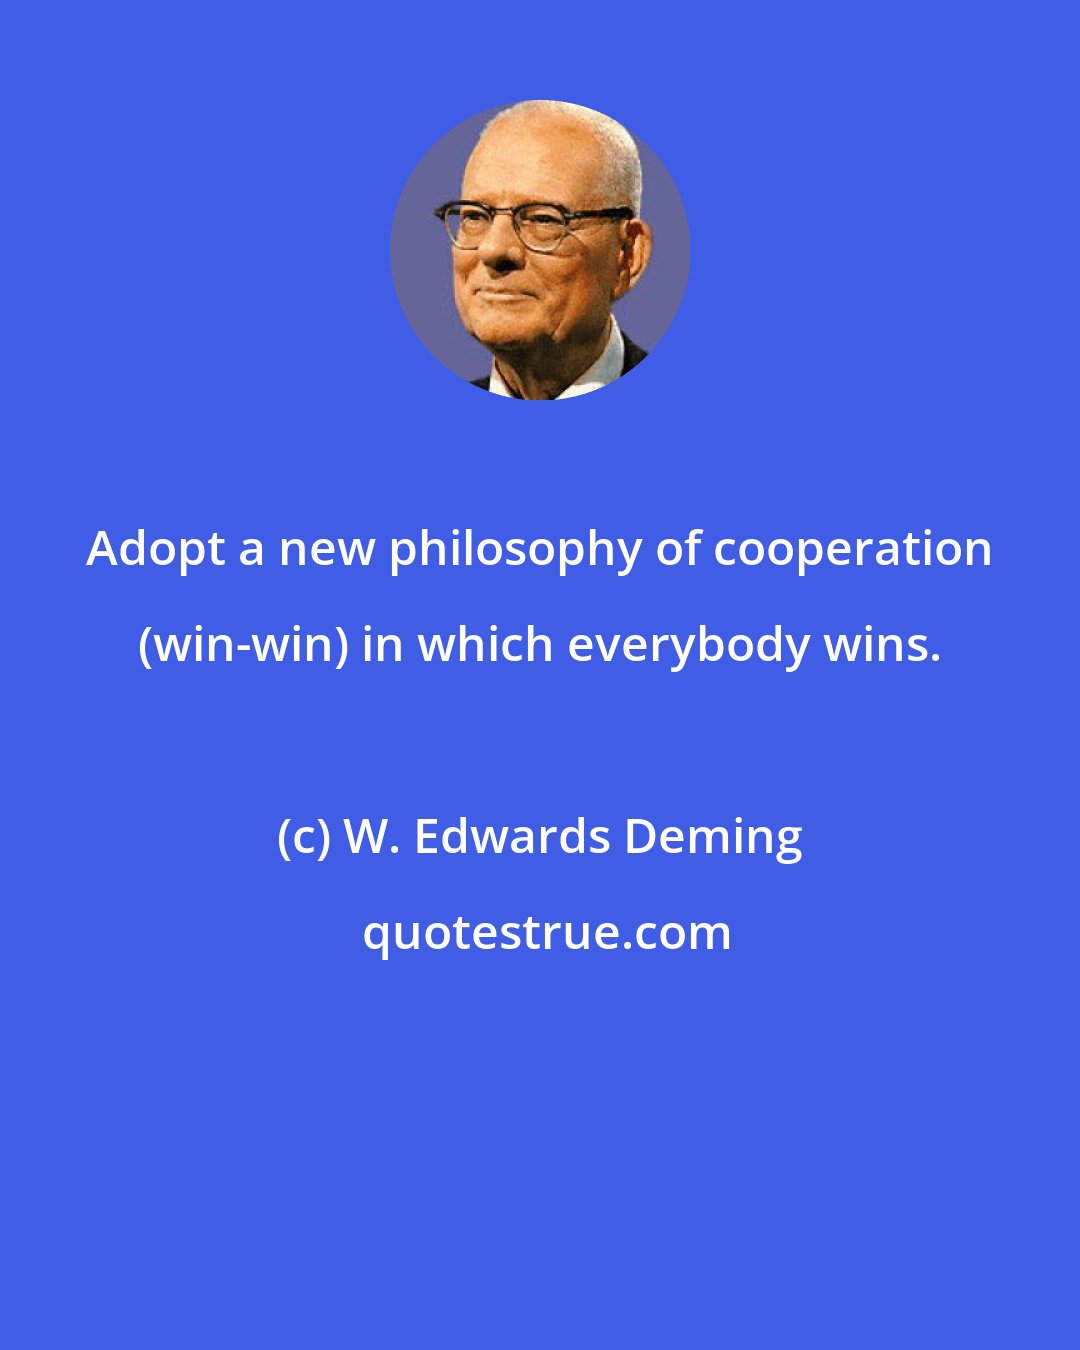 W. Edwards Deming: Adopt a new philosophy of cooperation (win-win) in which everybody wins.